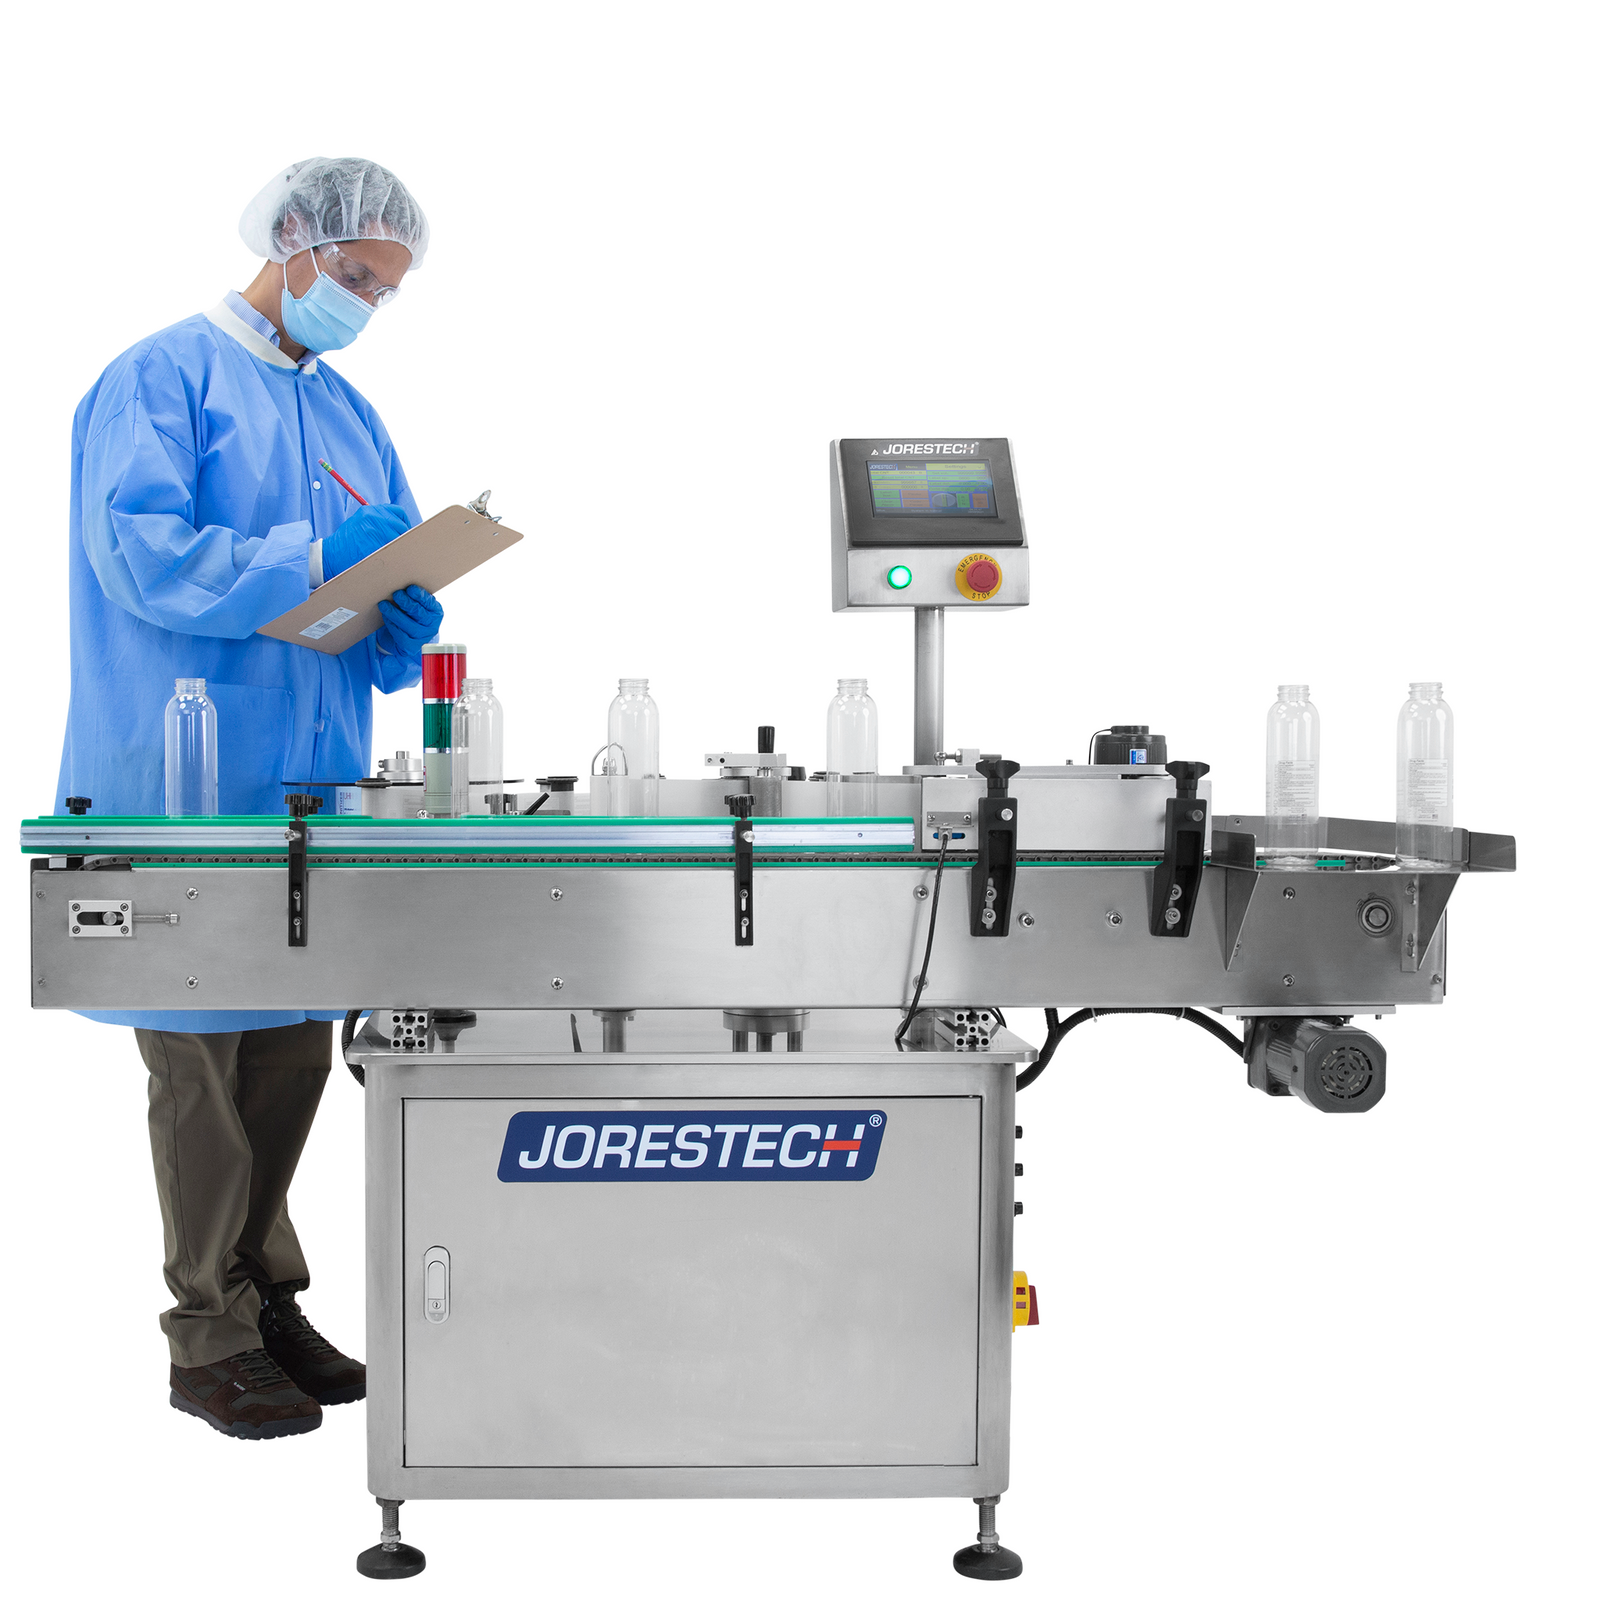 Worker checking a production line of a label applicator placing labels on small round clear contaners.